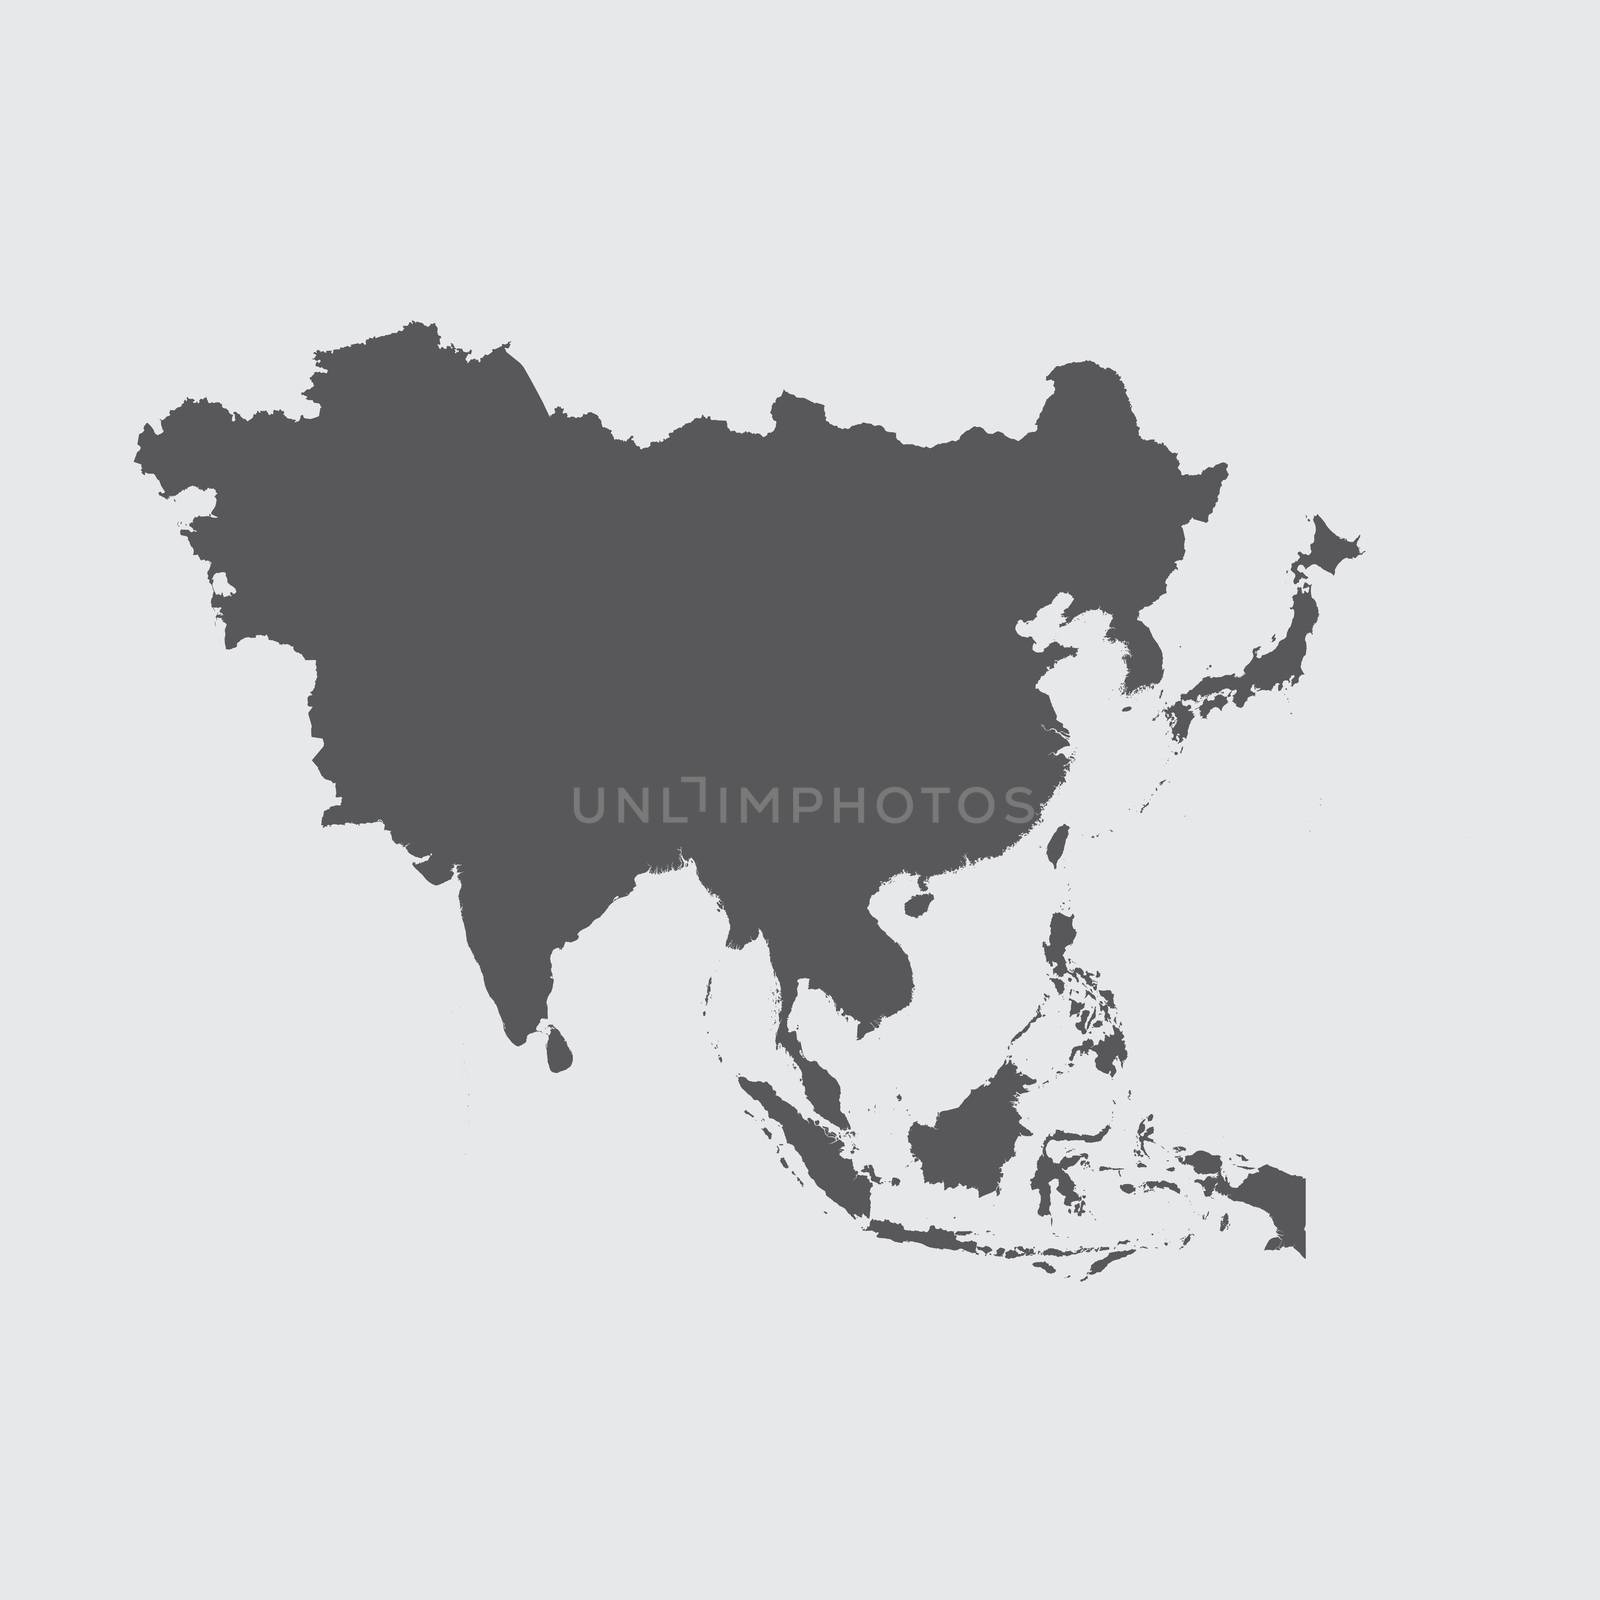 An Illustration on isolated background of the continent of Asia